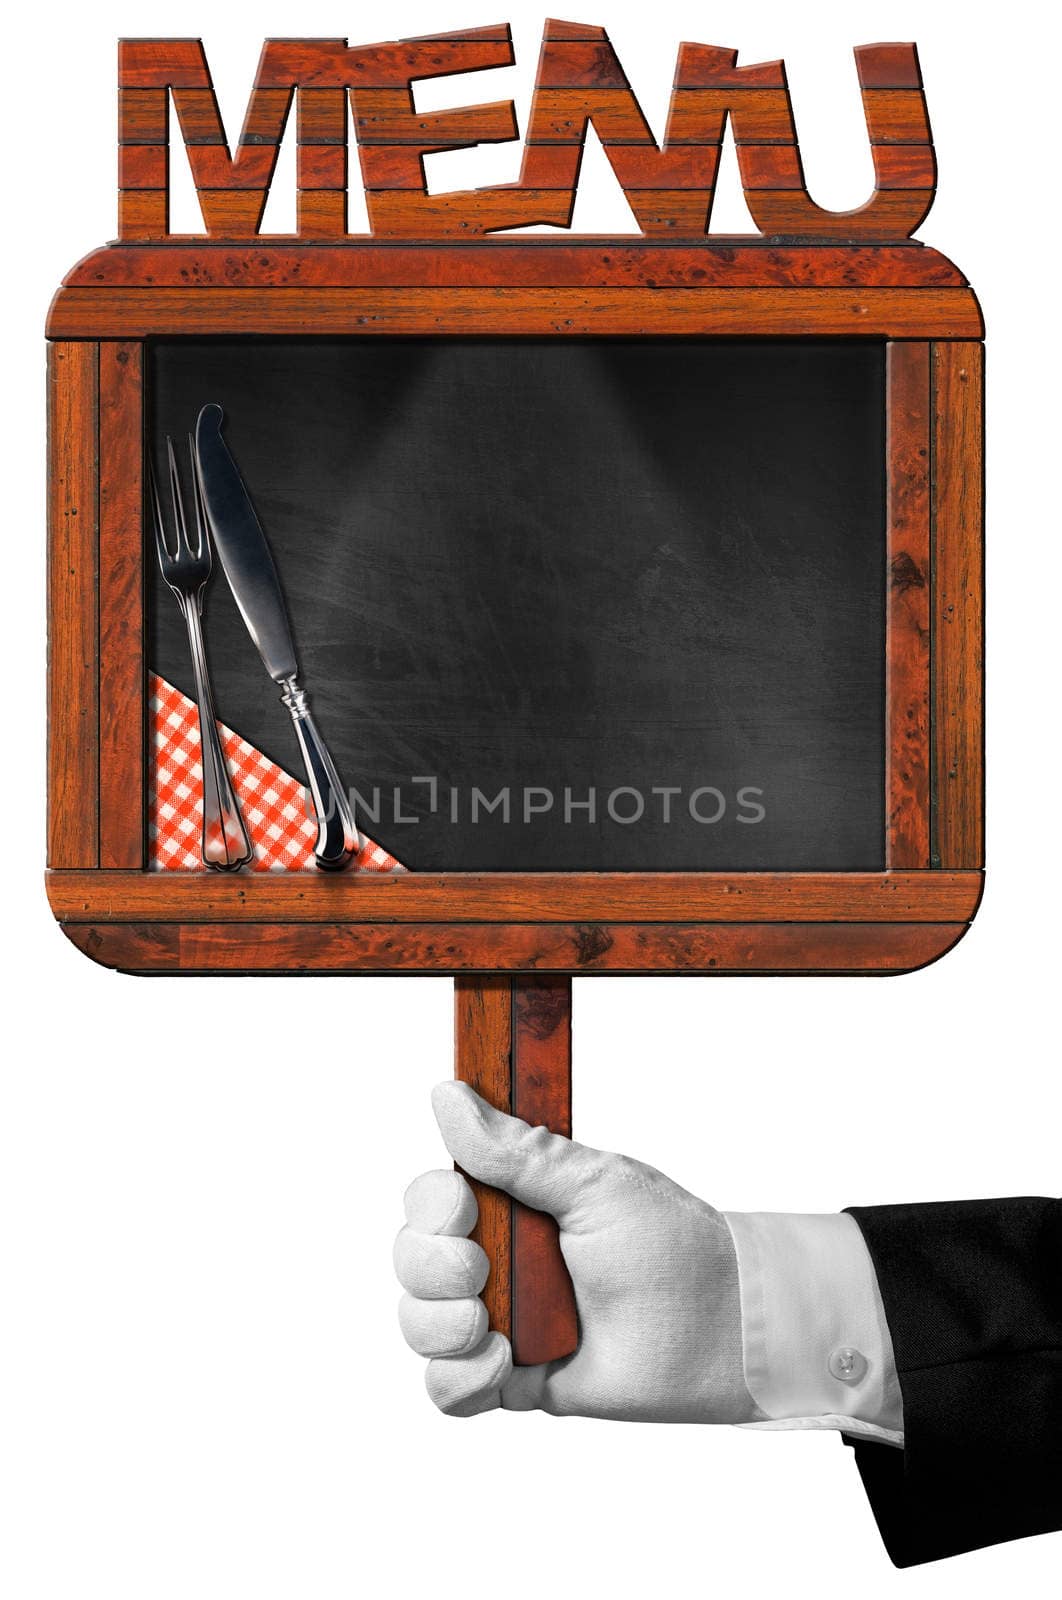 Hand of chef with white glove holding an old empty blackboard with wooden frame with text menu, silver cutlery and checkered tablecloth